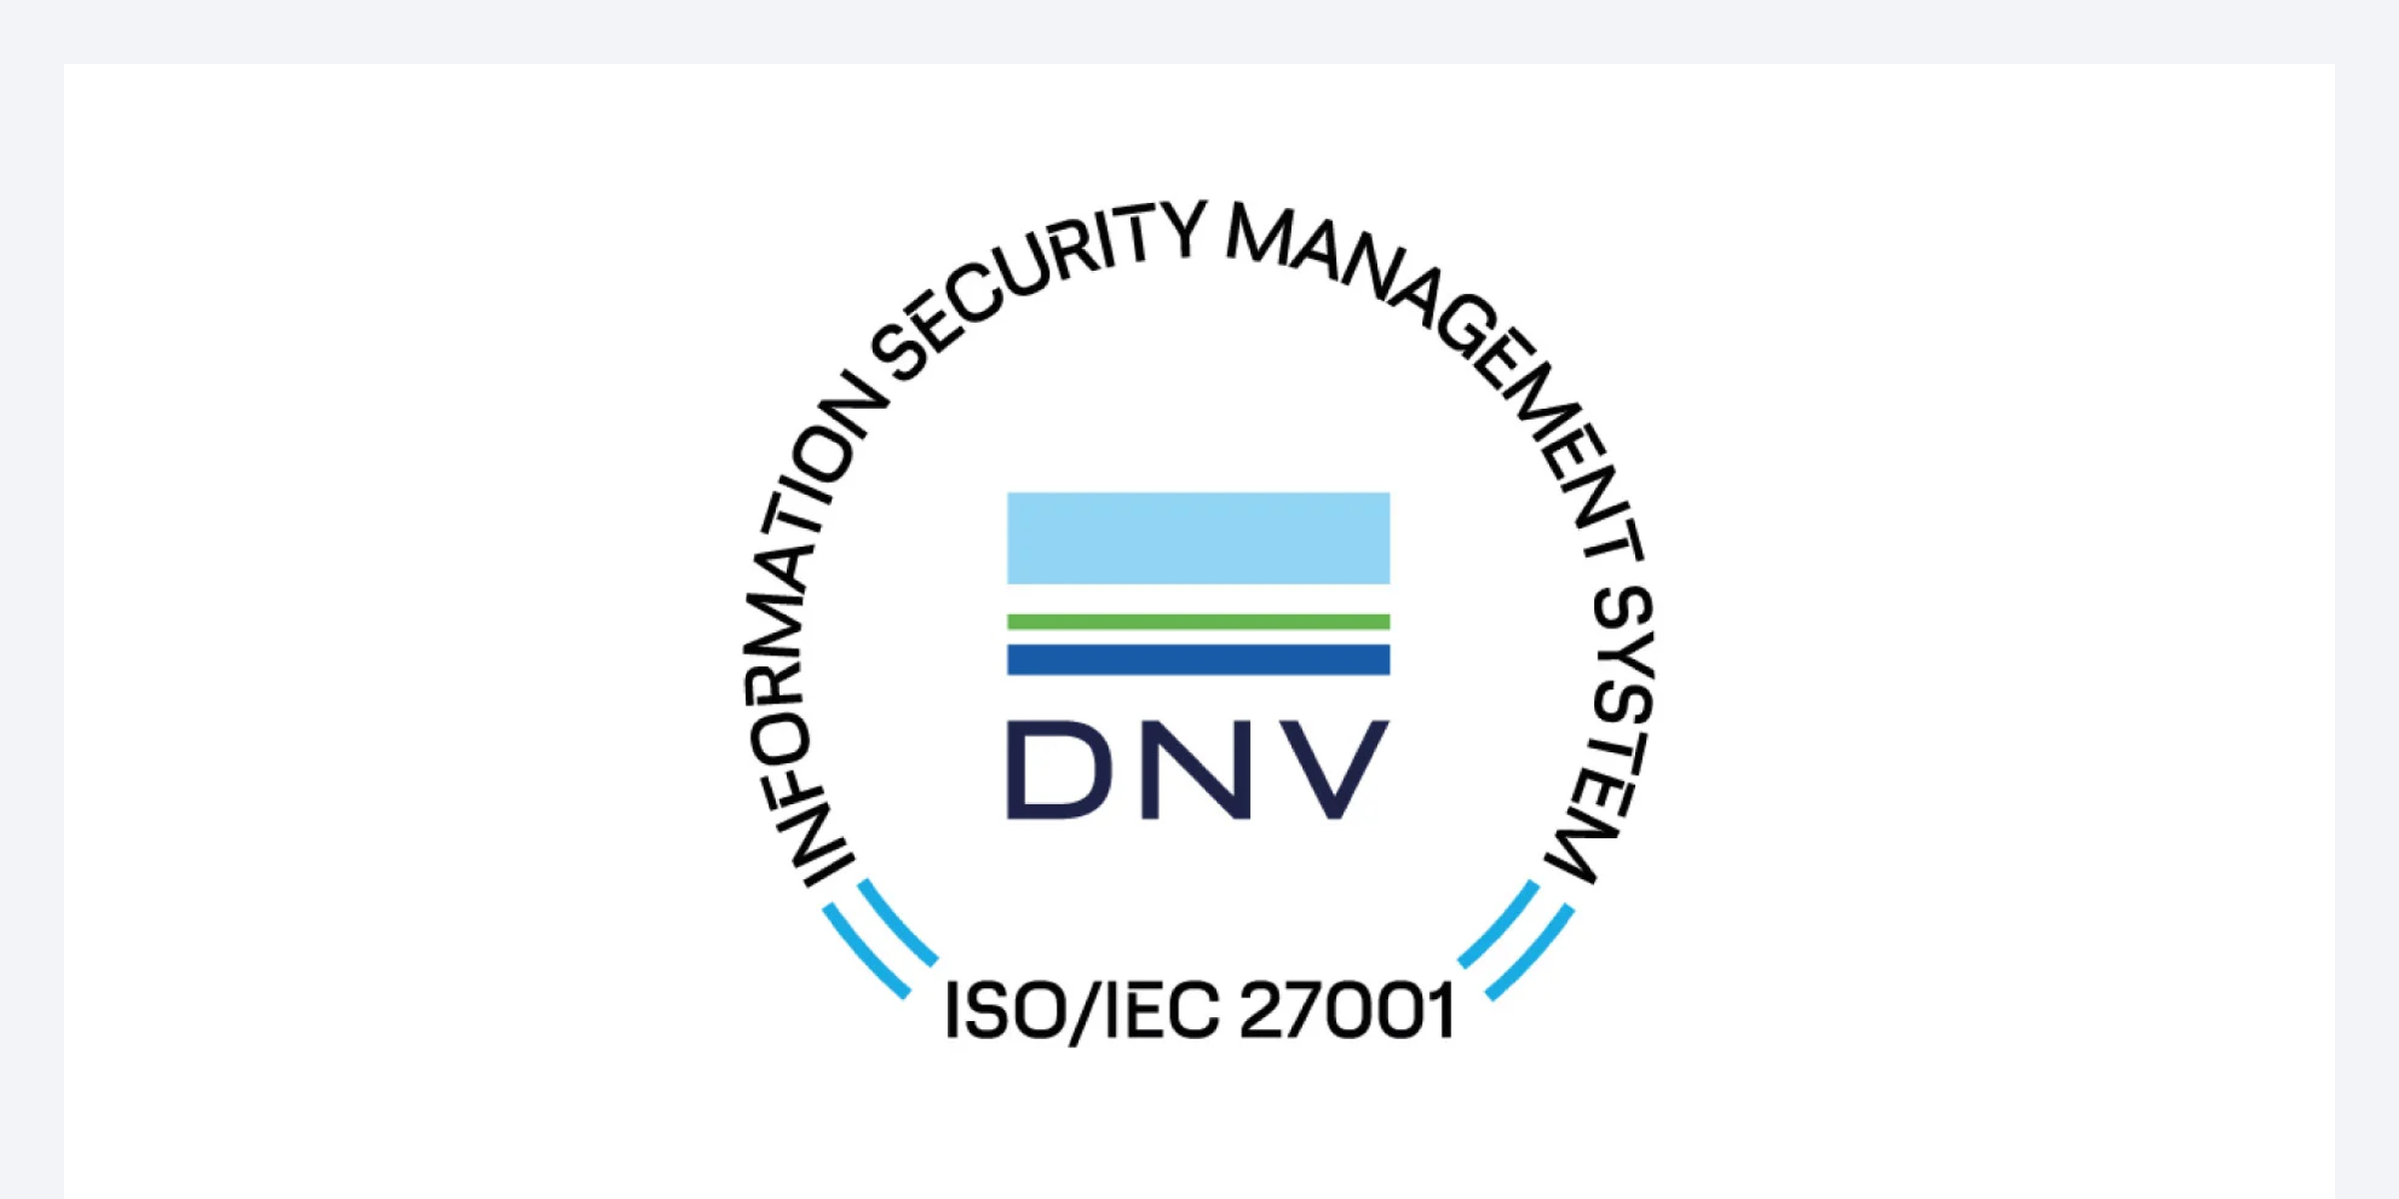 ISO - information security management system accreditation.